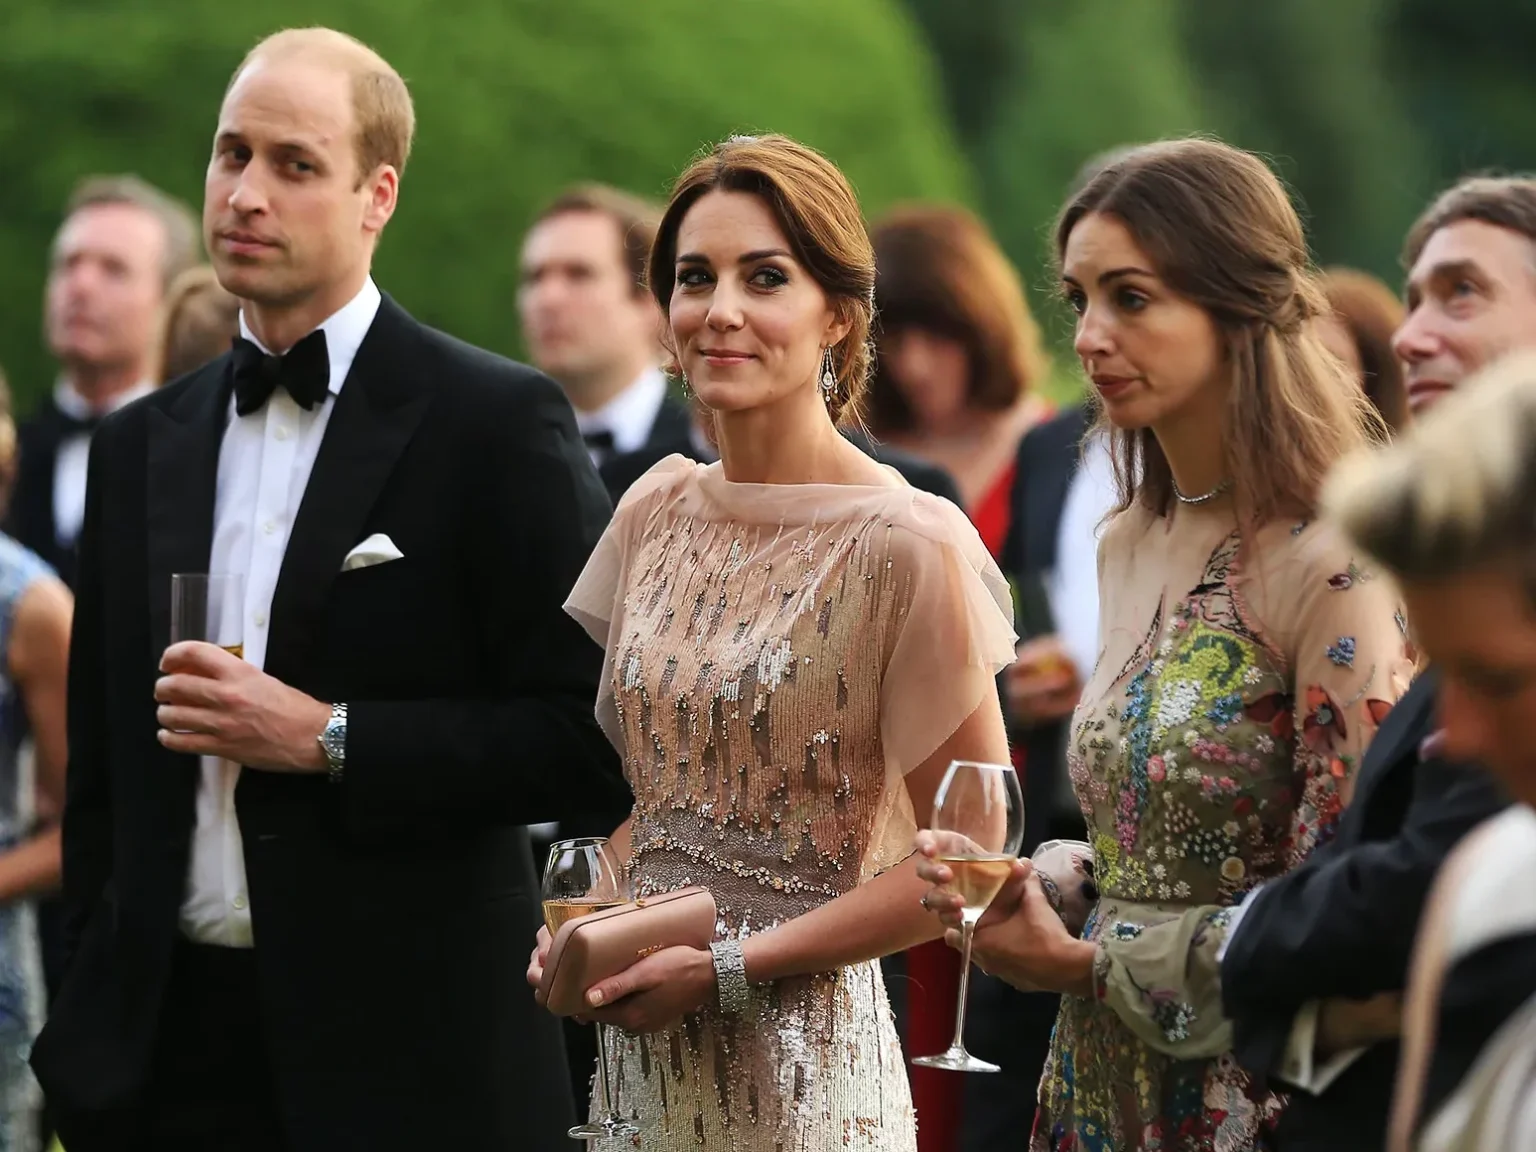 royal-couple-may-split-soon-as-latest-photo-sparks-claimed-that-prince-william-wasnt-in-the-car-with-kate-middleton-but-with-rose-hanbury